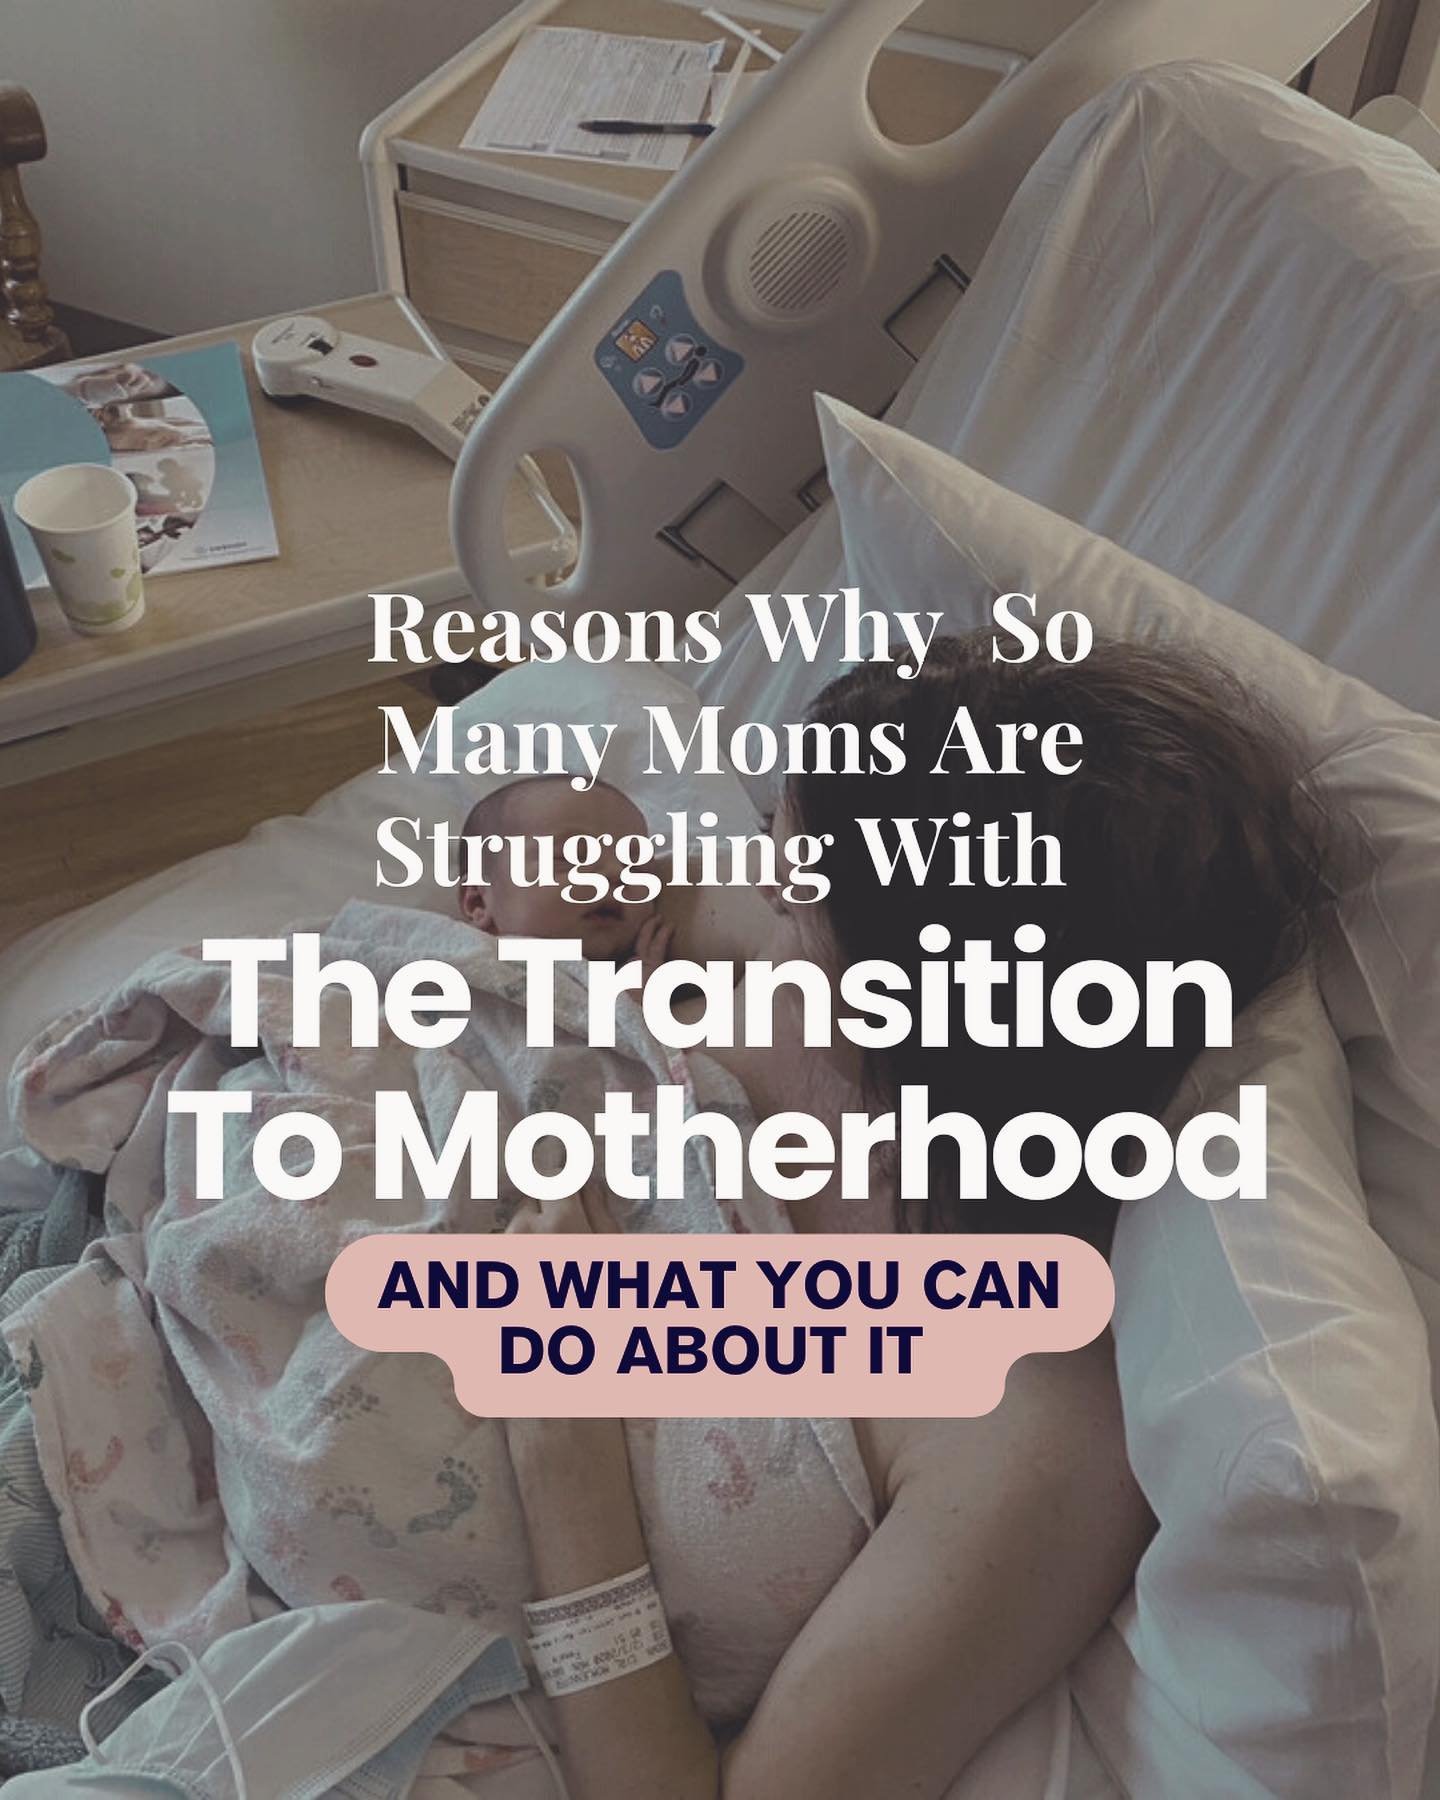 Does this sounds like your postpartum experience?? If so, you&rsquo;re so not alone.  As new moms, we&rsquo;re sent the message that:

&ldquo;The transition to motherhood should happen naturally, within a matter of weeks, with the goal of working bac